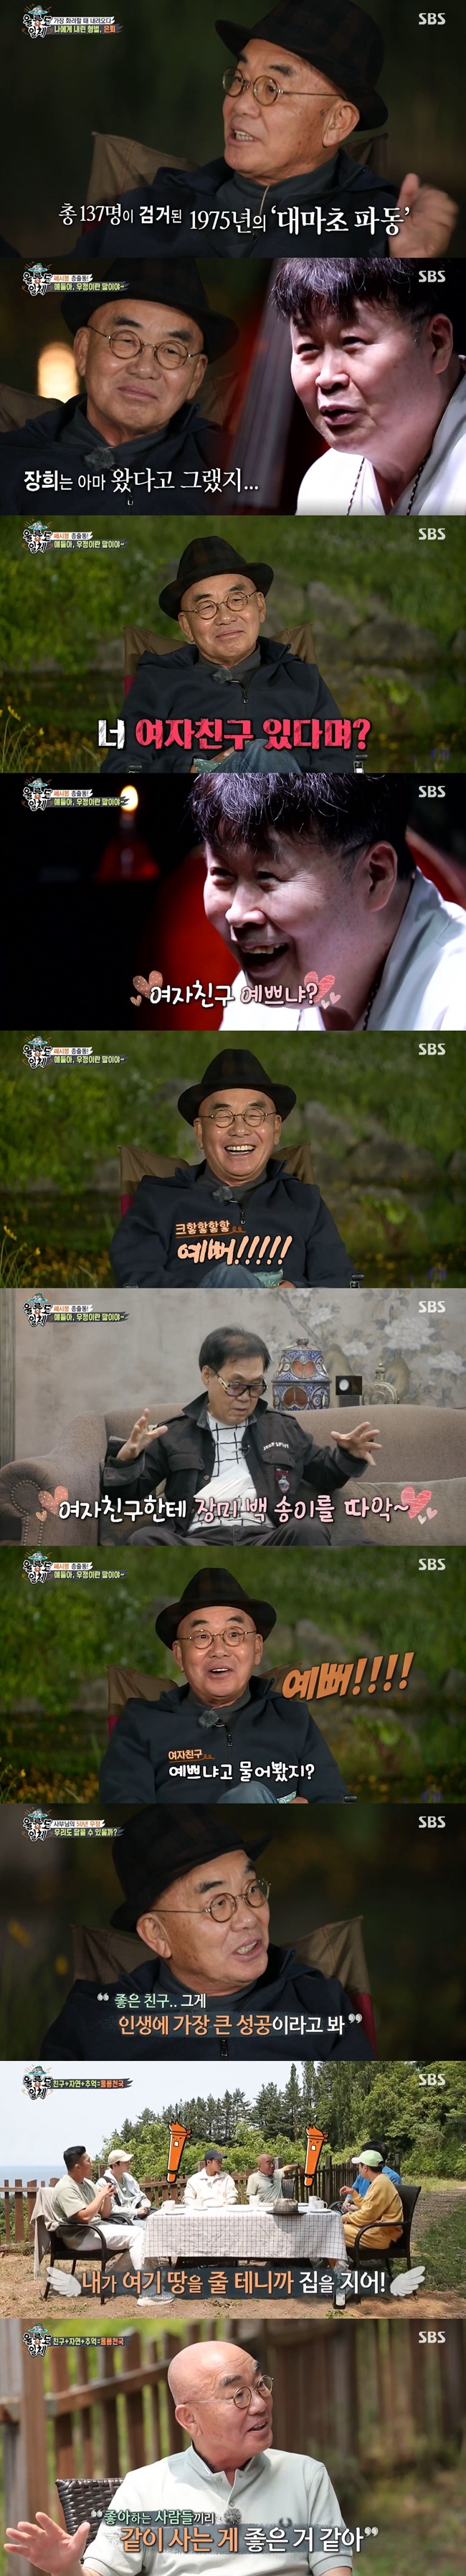 Yi Jang-hui coolly admitted to his devotion.On SBS All The Butlers broadcast on June 20, Master Yi Jang-hui and Master Ulleungdo 2 and the last trip to Shin Sung-rok - Cha Jung Eun-woo were drawn.Yi Jang-hui, who celebrated his 50th anniversary on the day, surprised everyone by saying, The period of activity is only four years.In particular, Yi Jang-hui is a person with numerous first titles such as Koreas first movie OST, First Korean radio station opening, First national CM song, and First Korean singer-turned-manager.In addition, Yi Jang-hui said, My song would have been the most banned song in our country.Yi Jang-hui said, Memories of a glass was a drinking director, Thats you passed on the sin to others, and Burned window was the reason for encouraging adultery.I wasnt retired, but I decided to retire because of the cannabis wave, Yi Jang-hui said.Among them, Cecibong colleague Song Chang-sik sent a video letter to celebrate the 50th anniversary of Yi Jang-huis debut.Song Chang-sik said: It was shocking to see the Yi Jang-hui stage at the beginning, ignoring the pitch, beats and techniques and just making me feel.I was shocked to call it great, he said. Thanks to my stereotype, I got out of it. Song Chang-sik also said, You have a GFriend? Is GFriend pretty?Cho Yeong-nam, considered as a spiritual landlord of Cecibong, then appeared, He (Yi Jang-hui) looks older than me, I told him, Hey!If you do it, people are surprised, he said, 50th anniversary of your debut? You are really old.Cho Young-nam also mentioned Yi Jang-huis GFriend and said, Yi Jang-huis most successful thing is finding love over seventy.In addition, Cho Young-nam expressed Jang Hee is a friend that others can not.Yi Jang-hui replied pretty when the questions related to GFriend were poured out, but thanked Song Chang-sik and Cho Young-nam.Yi Jang-hui also said, Today Jung Eun-woo and Sung Rok are the last? Its a relationship that you meet someone in life.Good Friend is the greatest success of life, advised Yi Jang-hui, who then stepped aside for the disciples final night.The disciples were saddened by stir-fried meat and soup stew.The next morning, the disciples went on an Ulleungdo kayak tour; at the same time Yi Jang-hui prepared breakfast with his own bread for the disciples.Yi Jang-hui said he learned baking last year so Lee Seung-gi admired romanticists should try; Yi Jang-hui said, Its not that simple.There is no free in life, he replied.